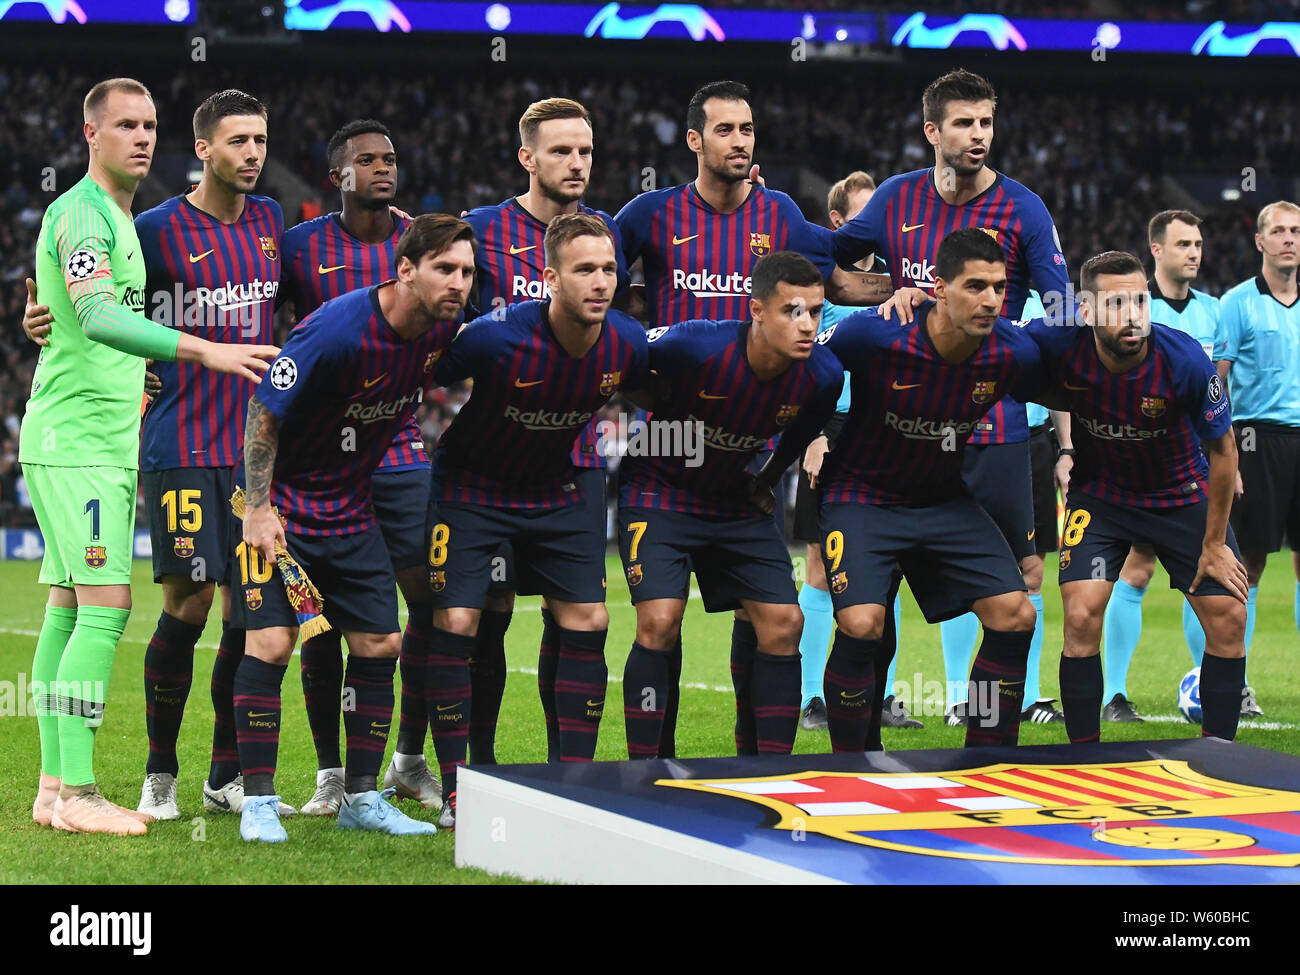 LONDON, ENGLAND - OCTOBER 3, 2018: Barcelona lineup pictured prior to the 2018/19 UEFA Champions League Group B game between Tottenham Hotspur (England) and FC Barcelona (Spain) at Wembley Stadium. Stock Photo